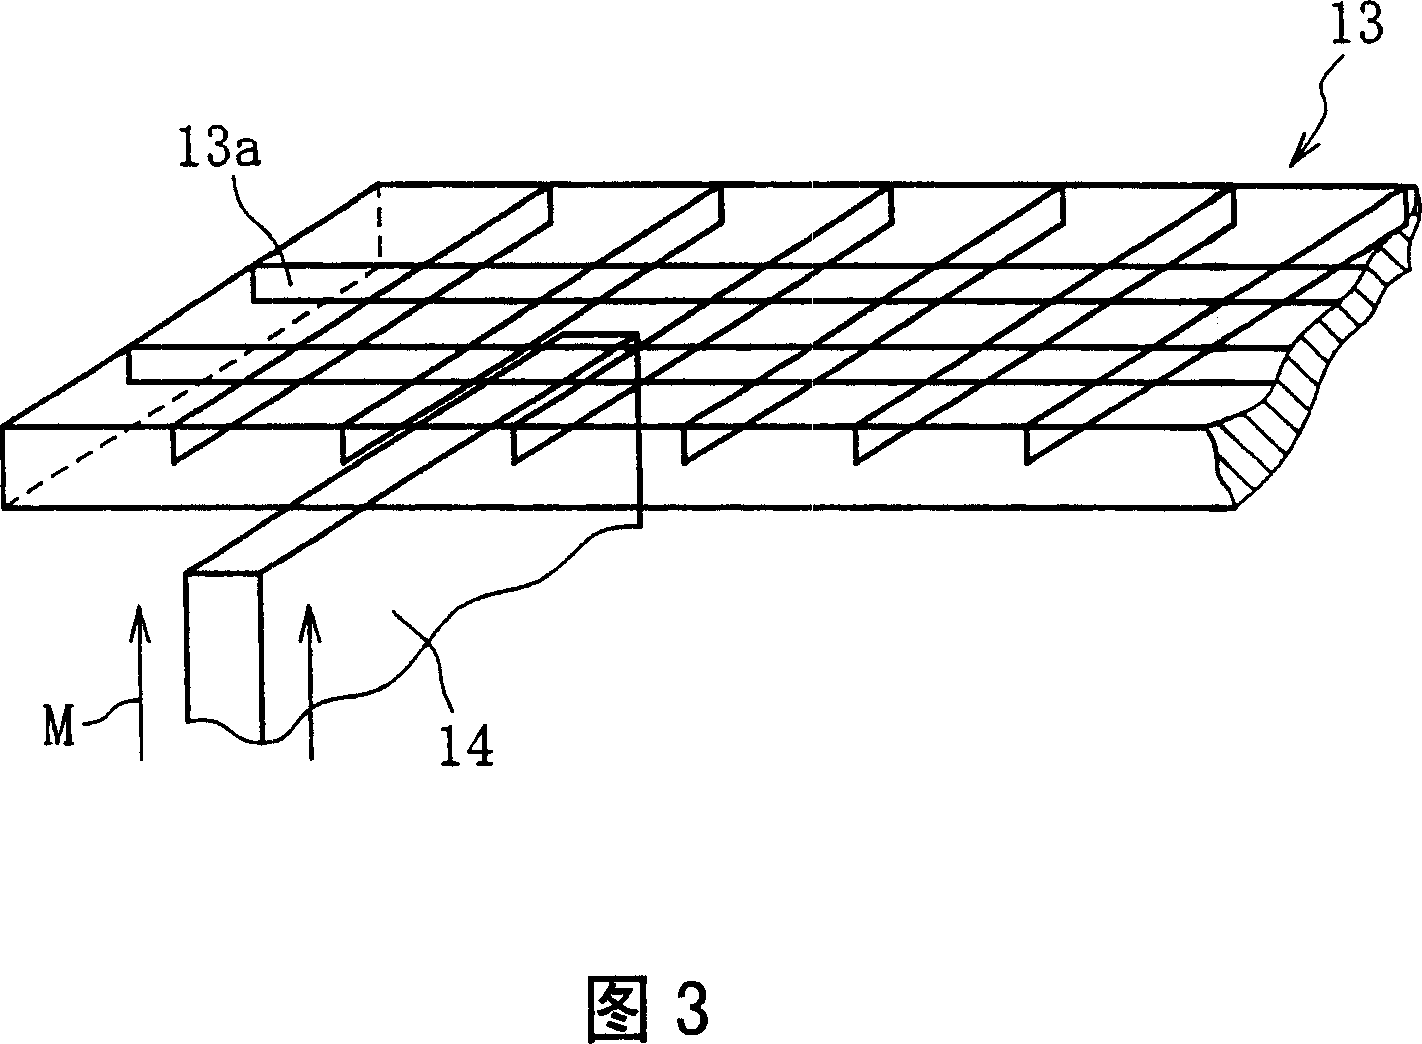 Cover glass for semiconductor package and method for producing same